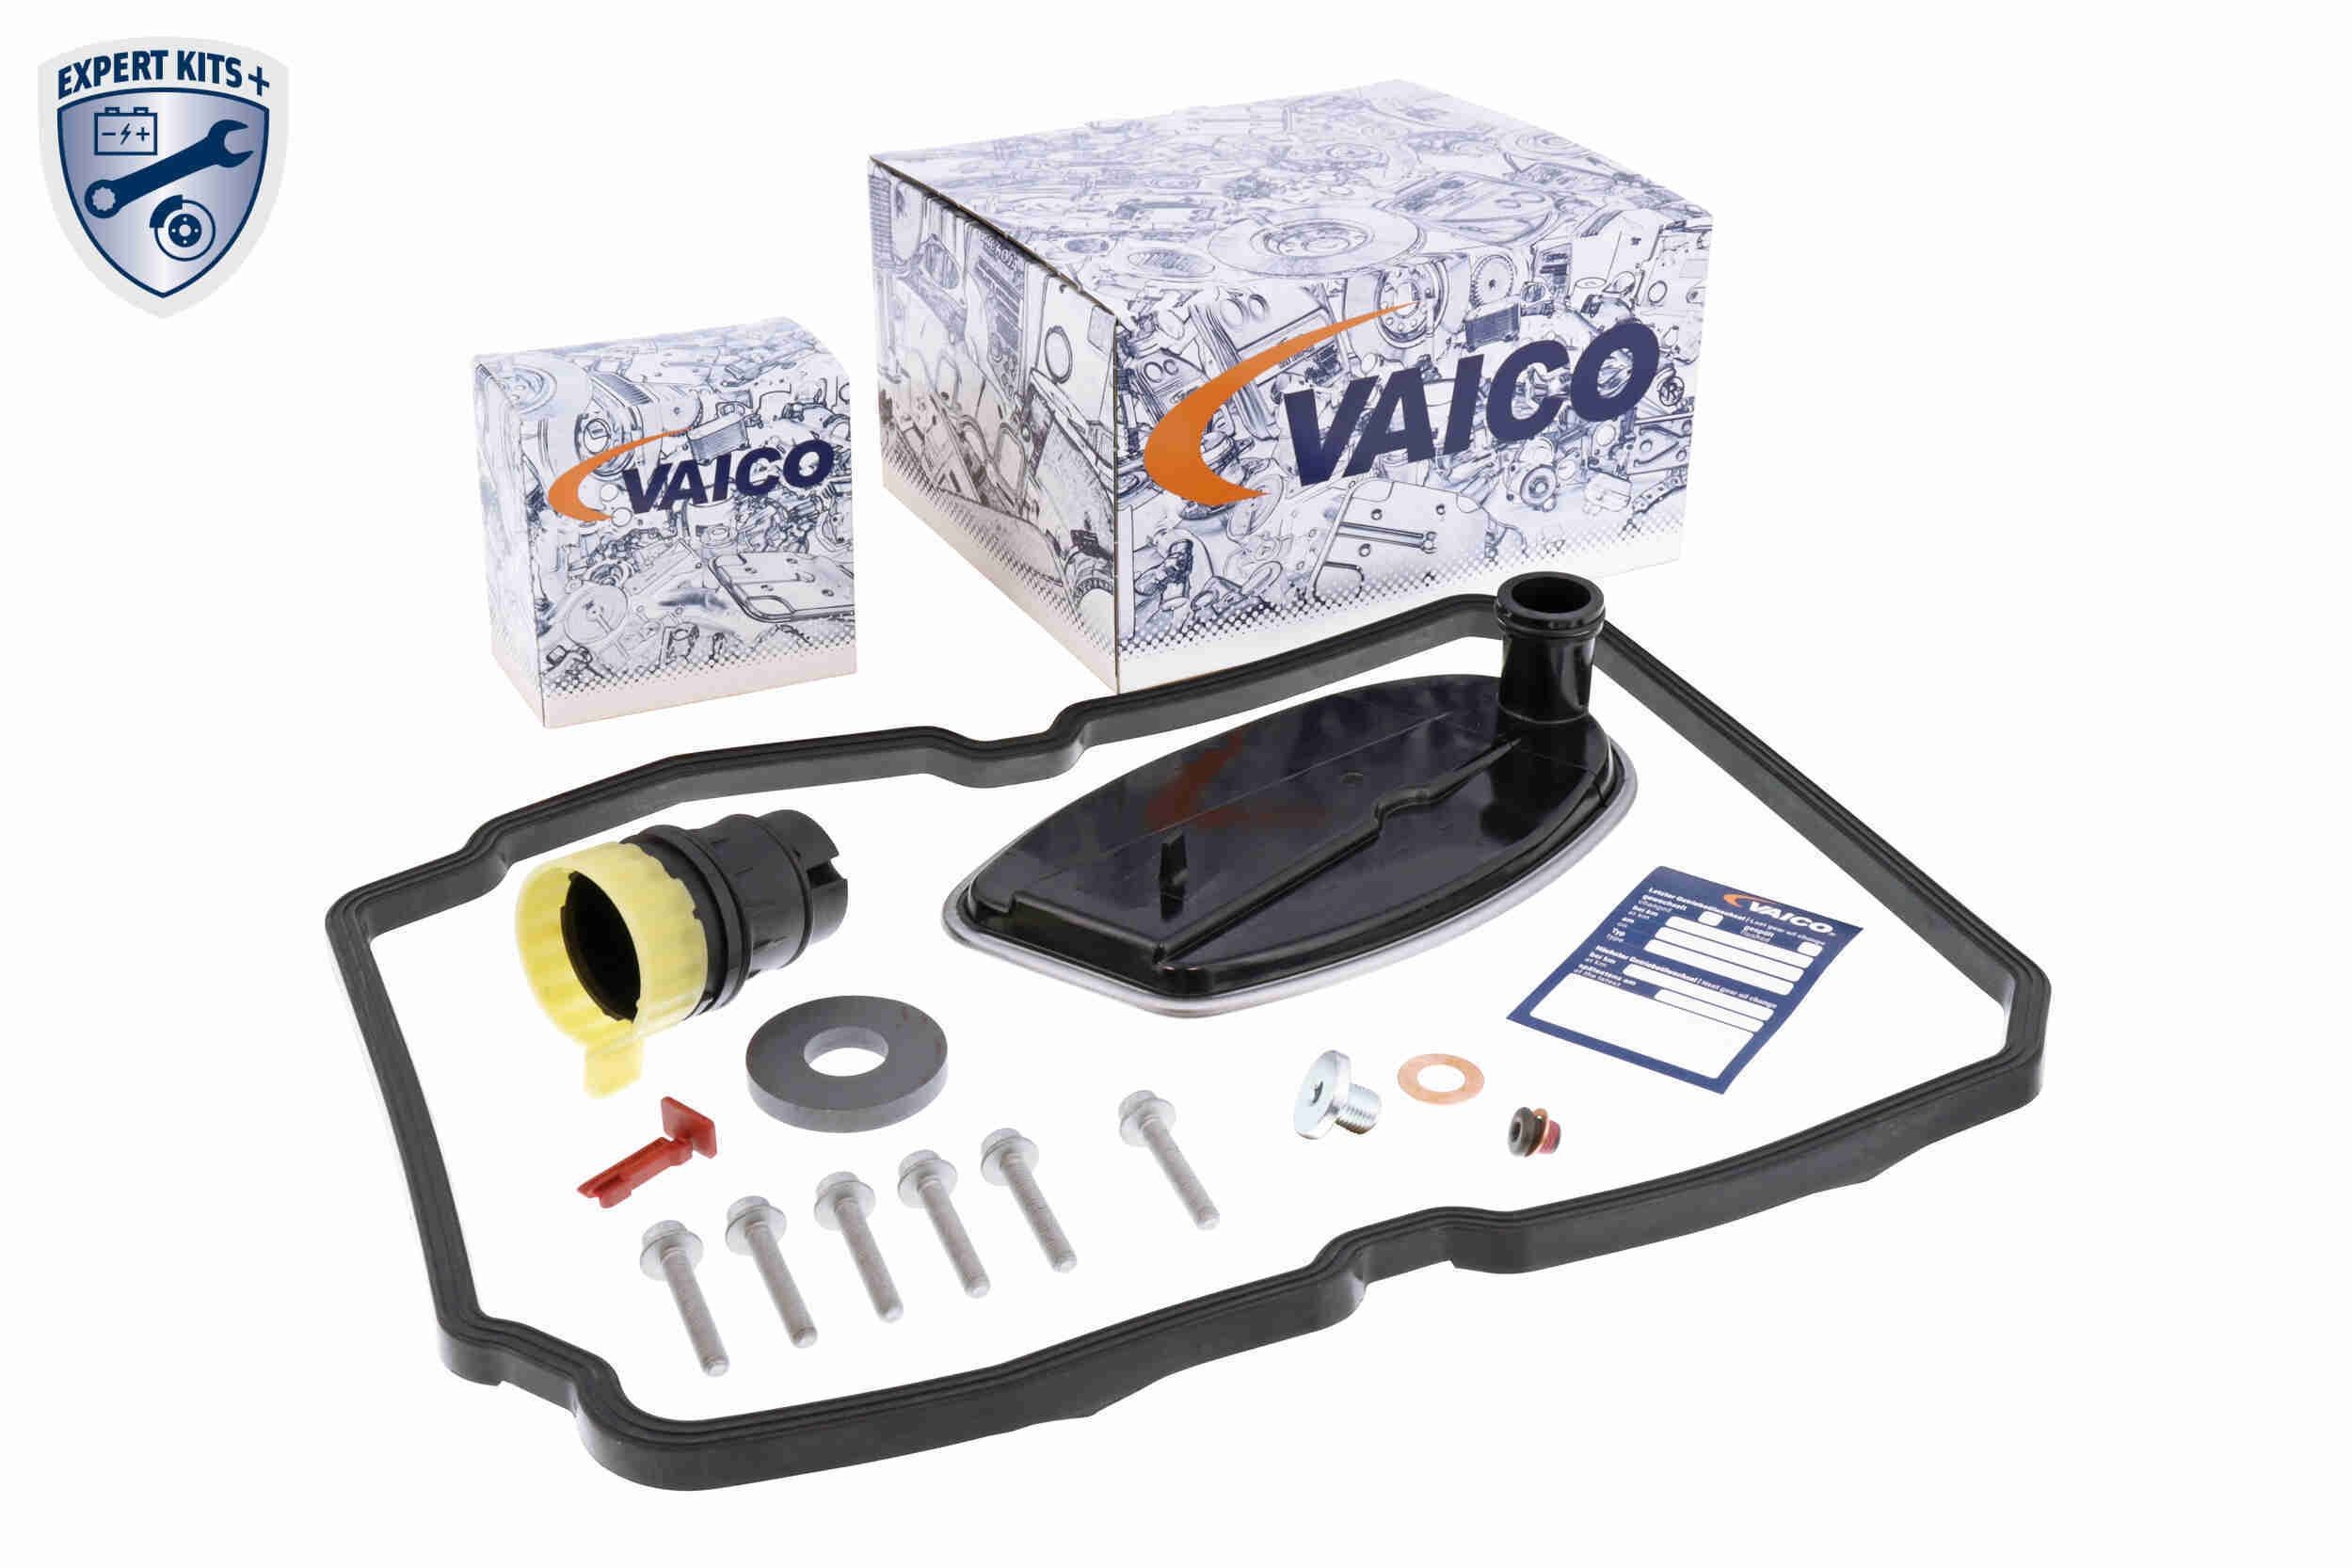 VAICO 203 540 02 53 Hydraulic Filter Set, automatic transmission with seal, with seal ring, EXPERT KITS +